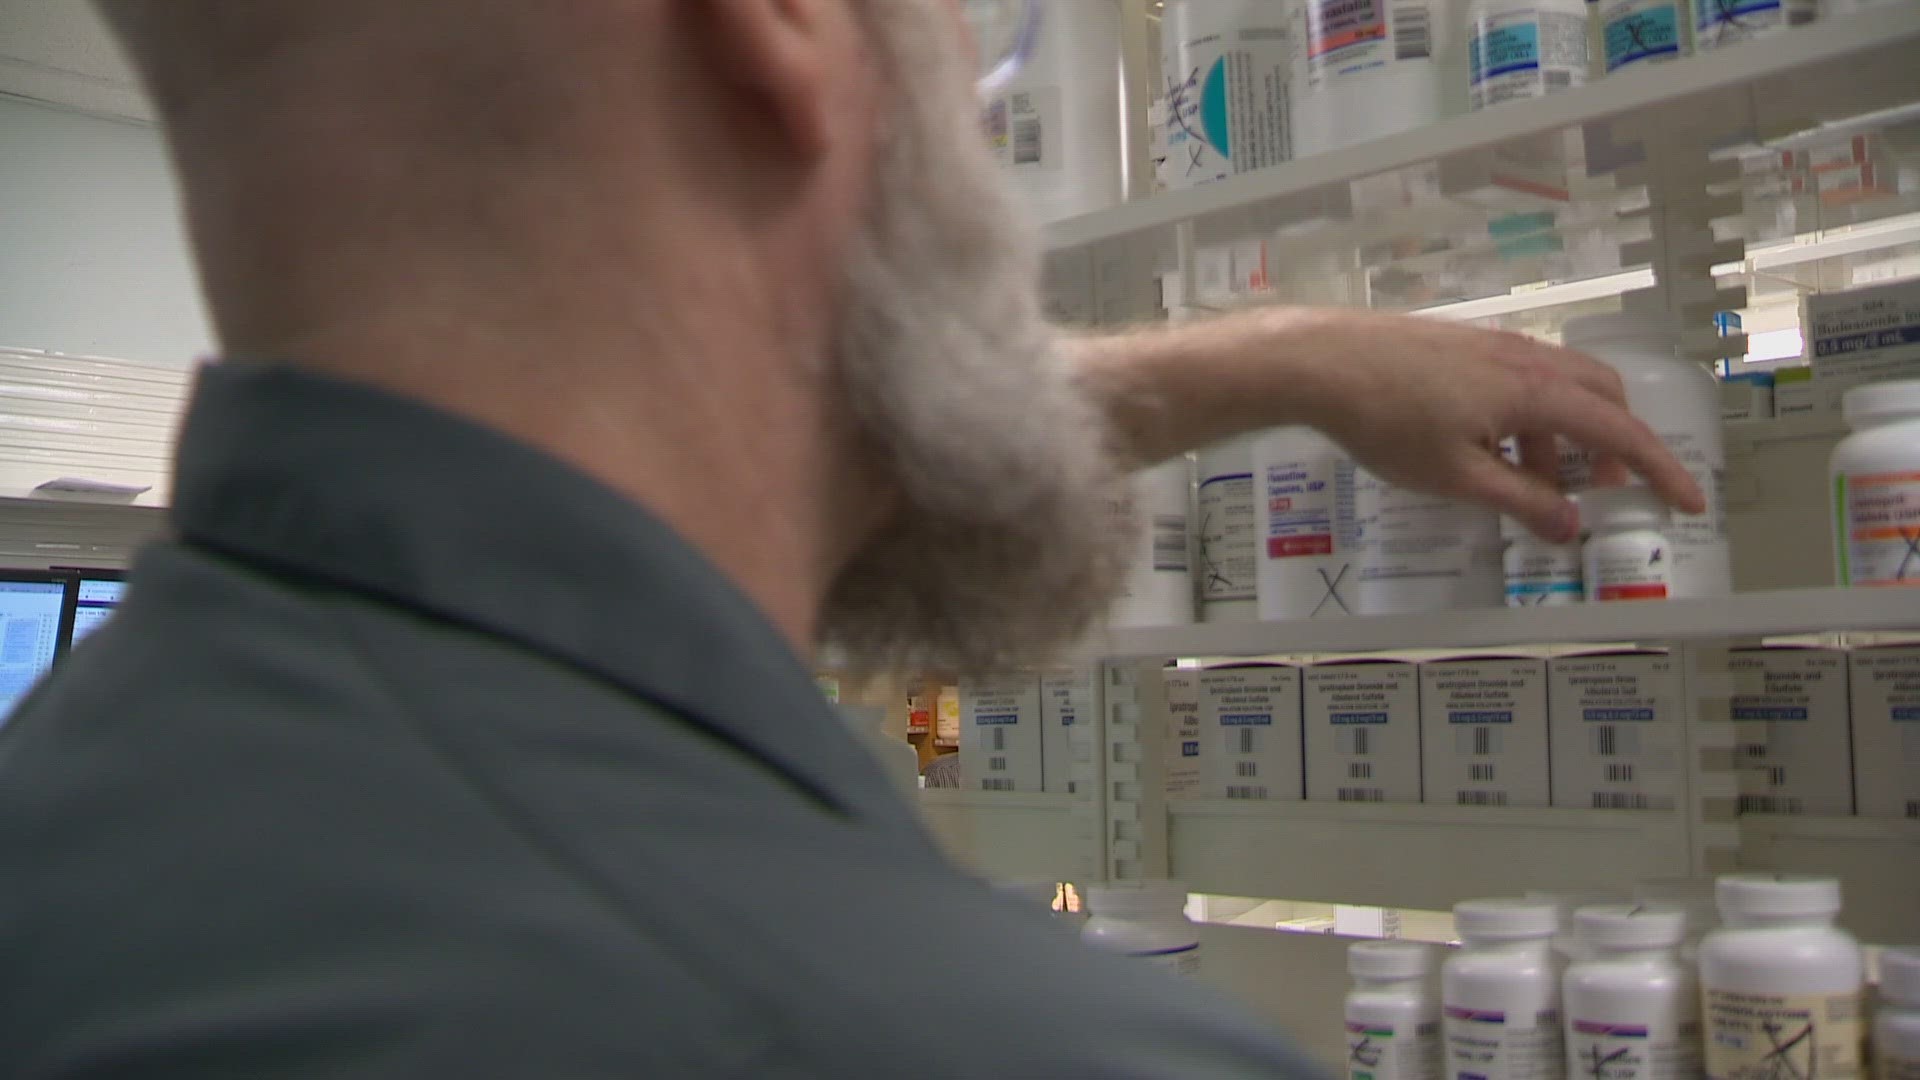 Amid the strain, some local pharmacists are now bailing others out of a bad spot.